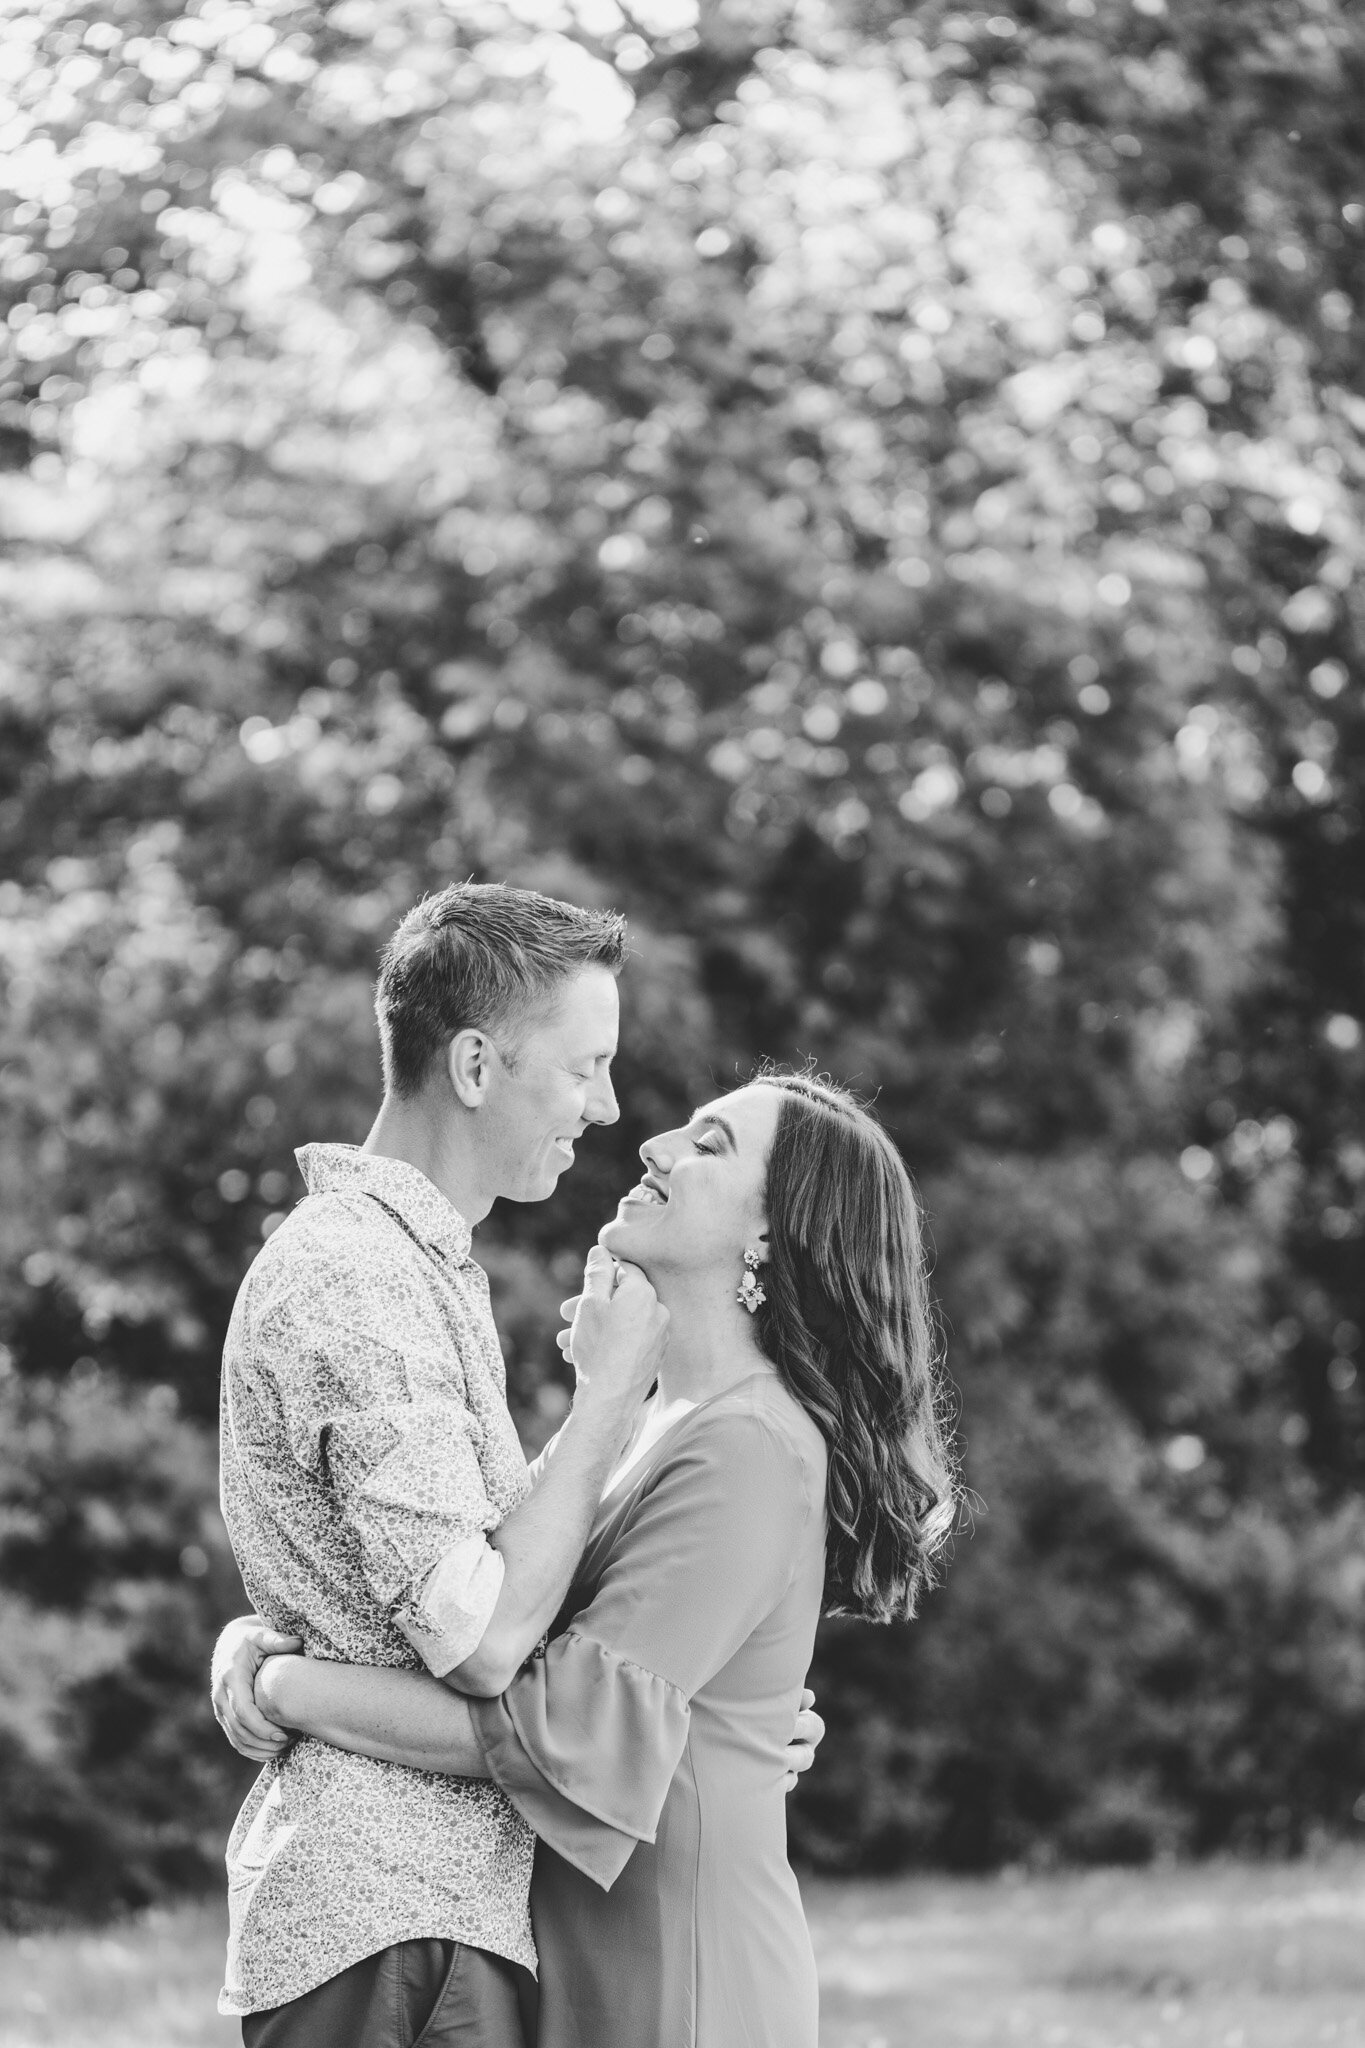 Colorful Engagement Session at the Orchard | Light and Airy Michigan Wedding Photographer